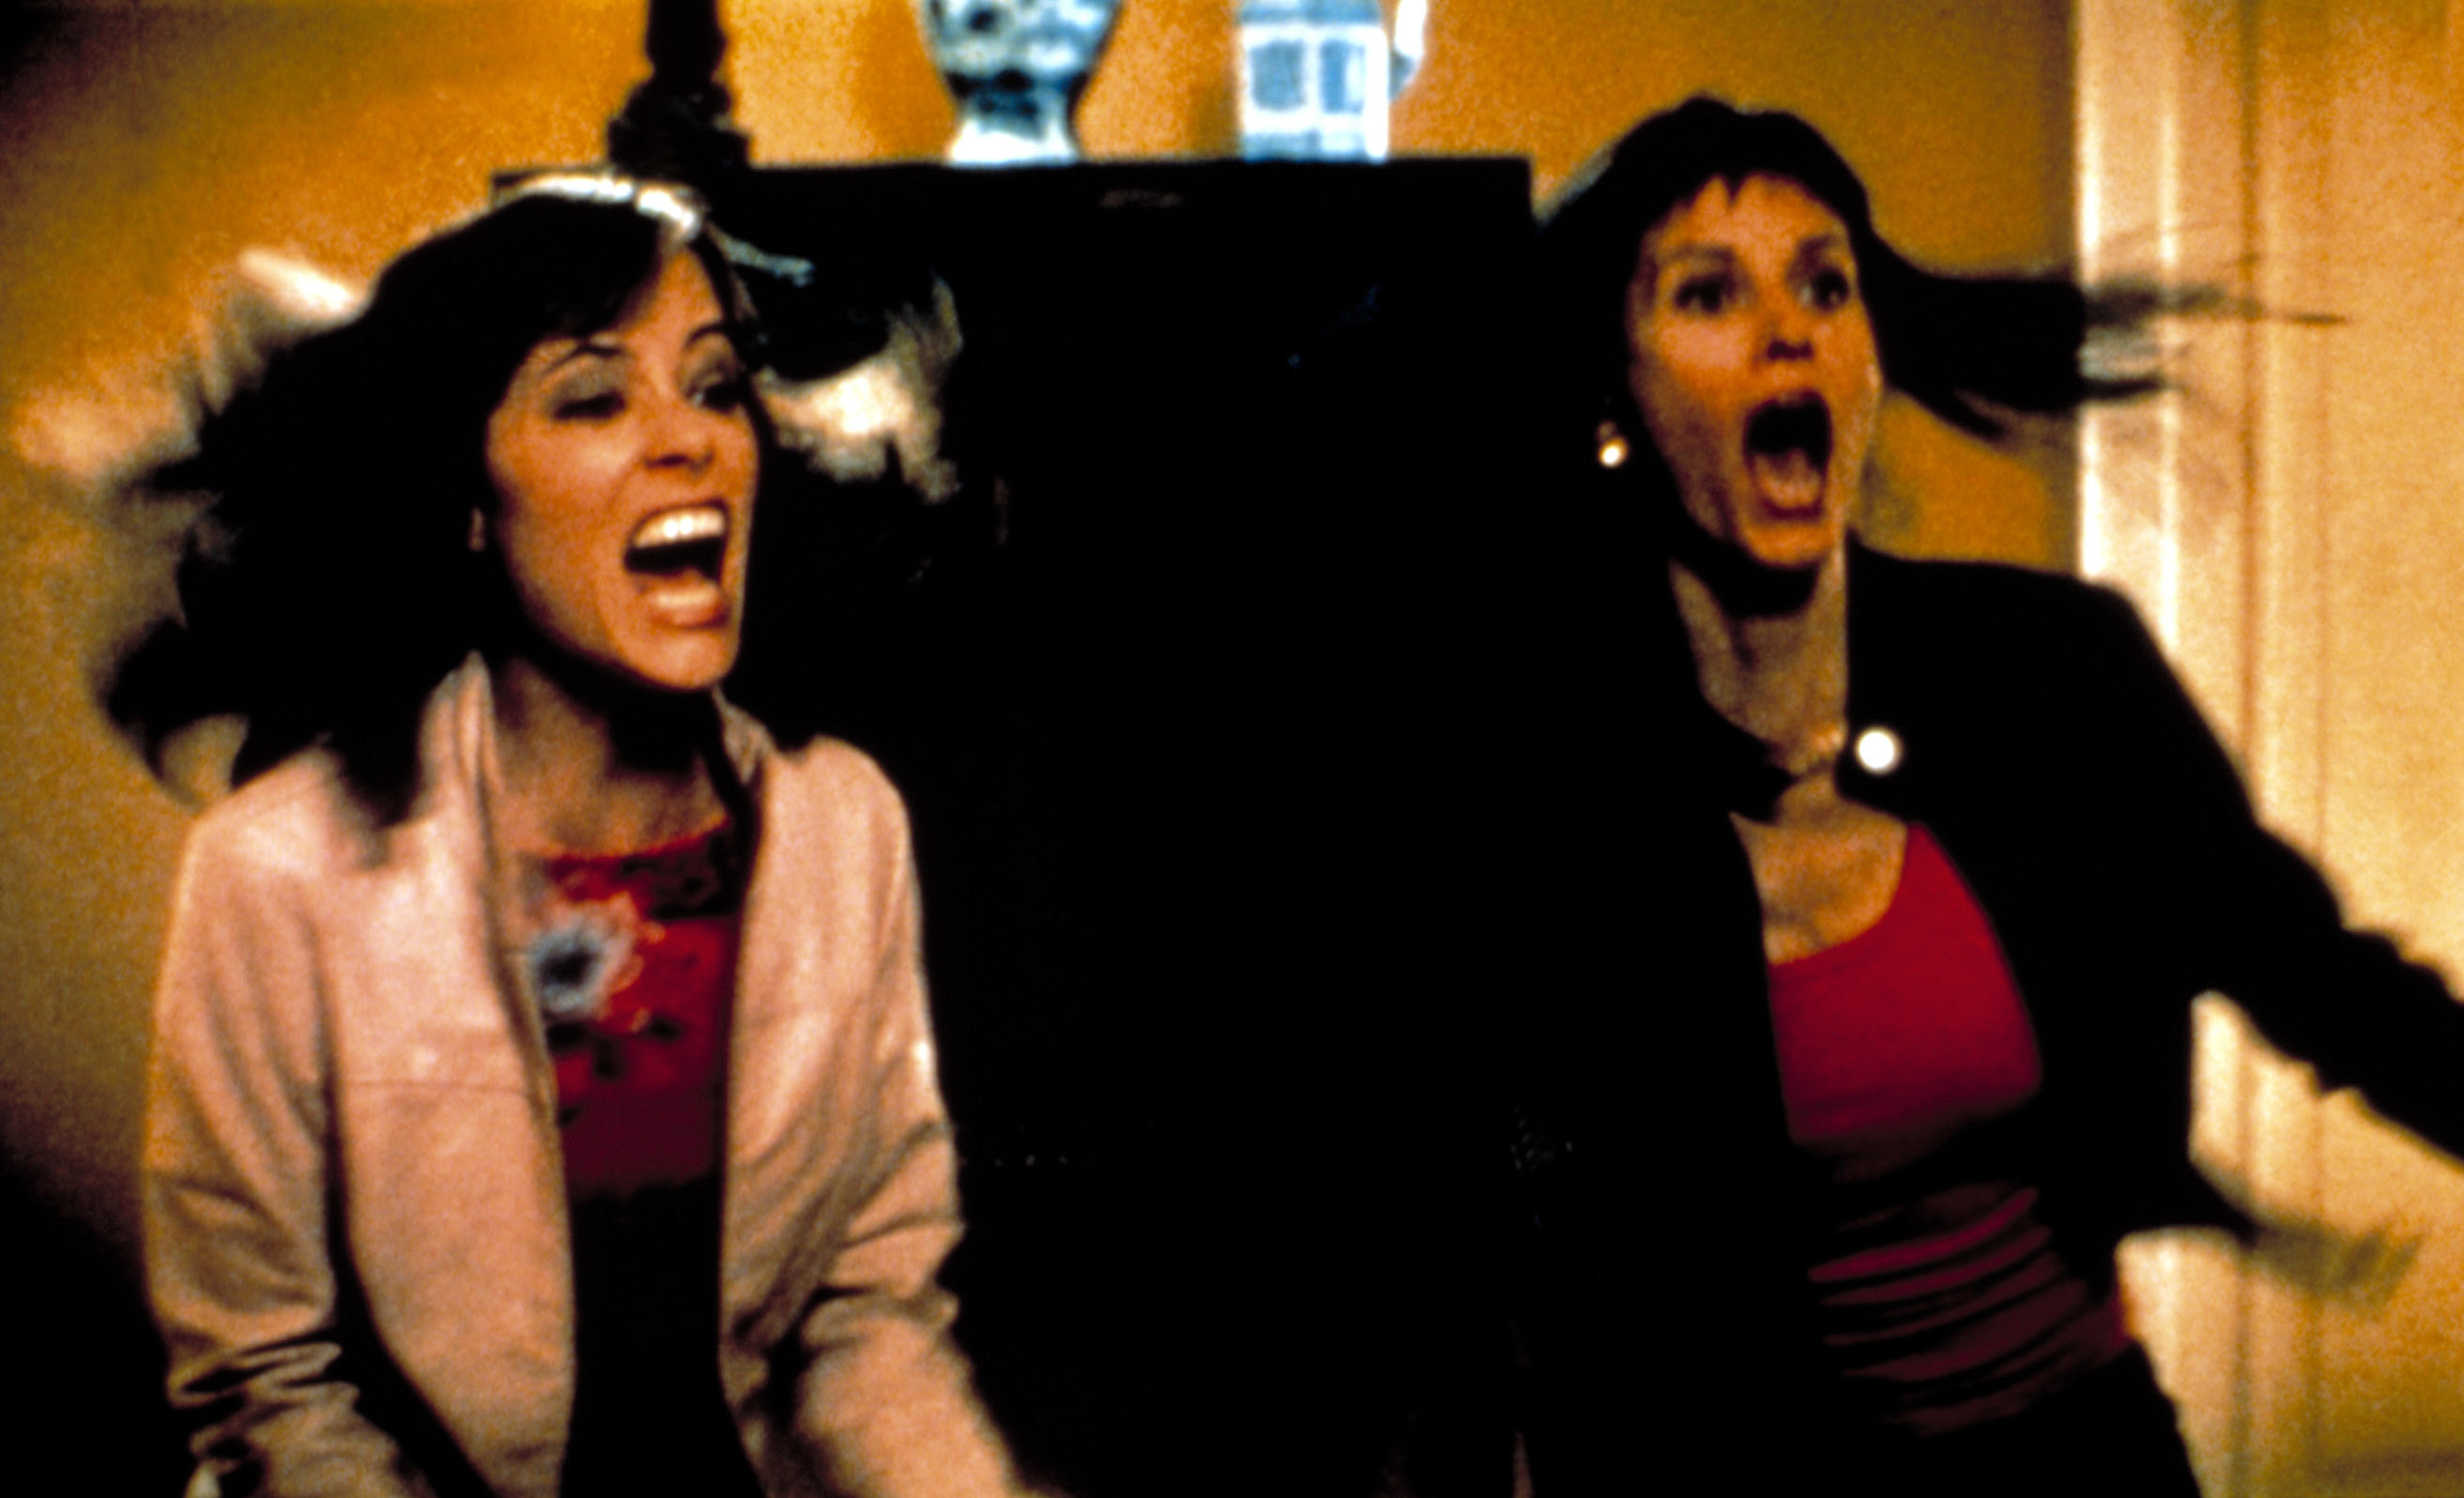 Parker Posey and Courteney Cox scream